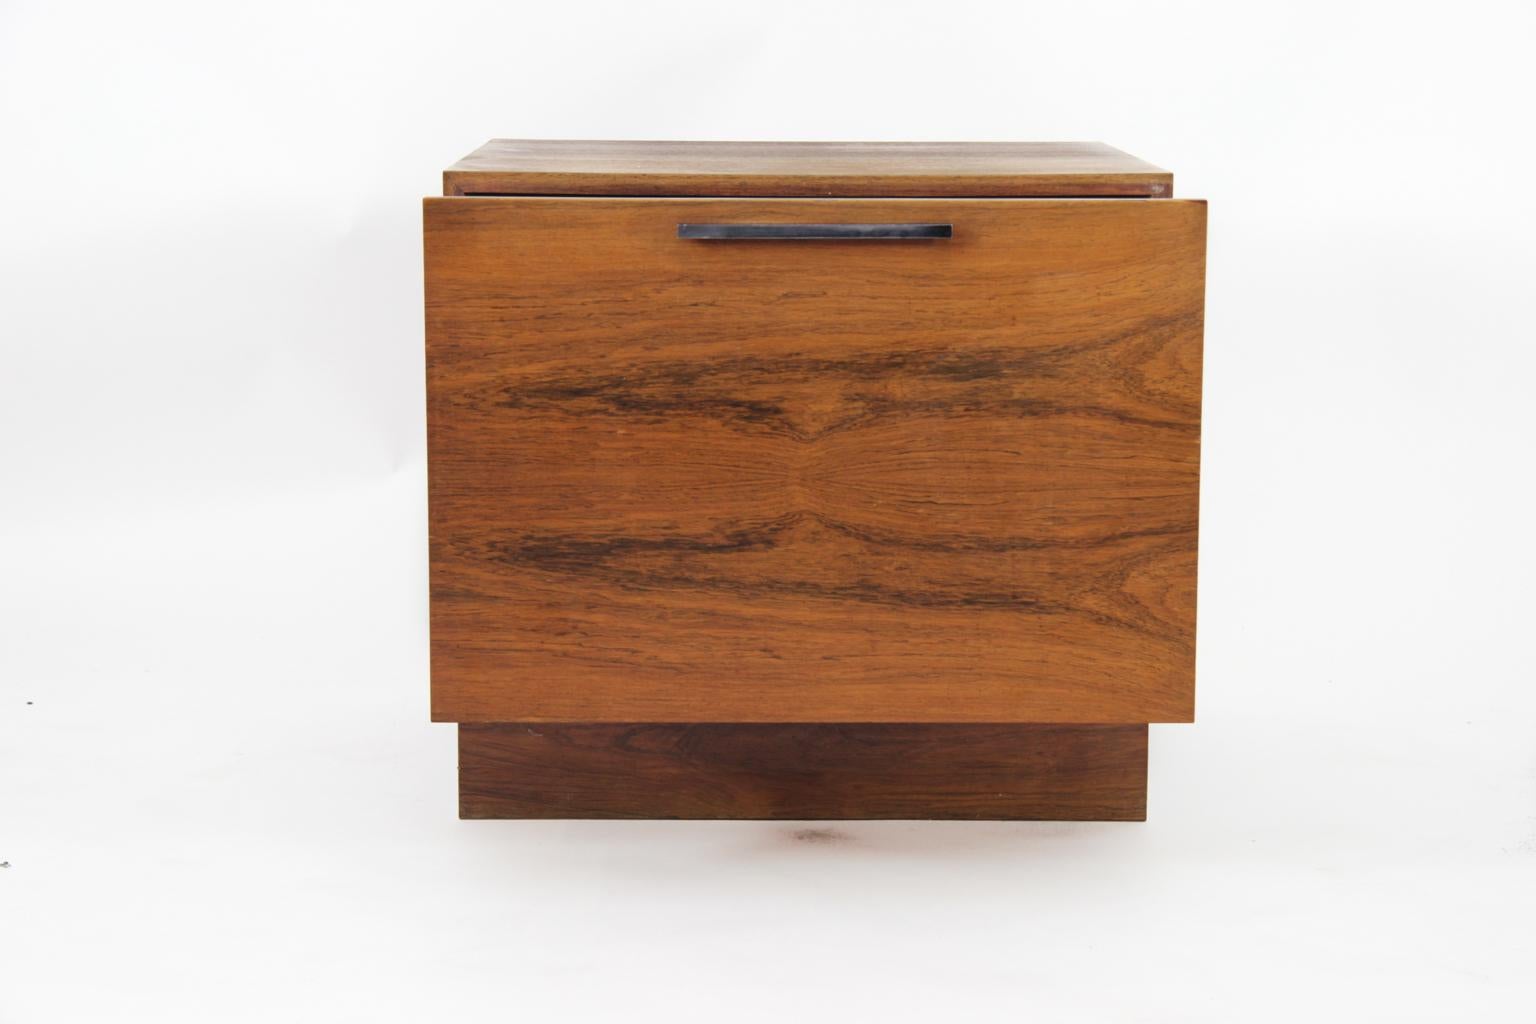 Smart little sideboard, nightstand by Ib Kofod Larsen for Faarup, made in Denmark in the 1960s. Rosewood and rosewood veneer with handles in black metal. 
We have more items in the same serie as this sideboard, also with the black metal